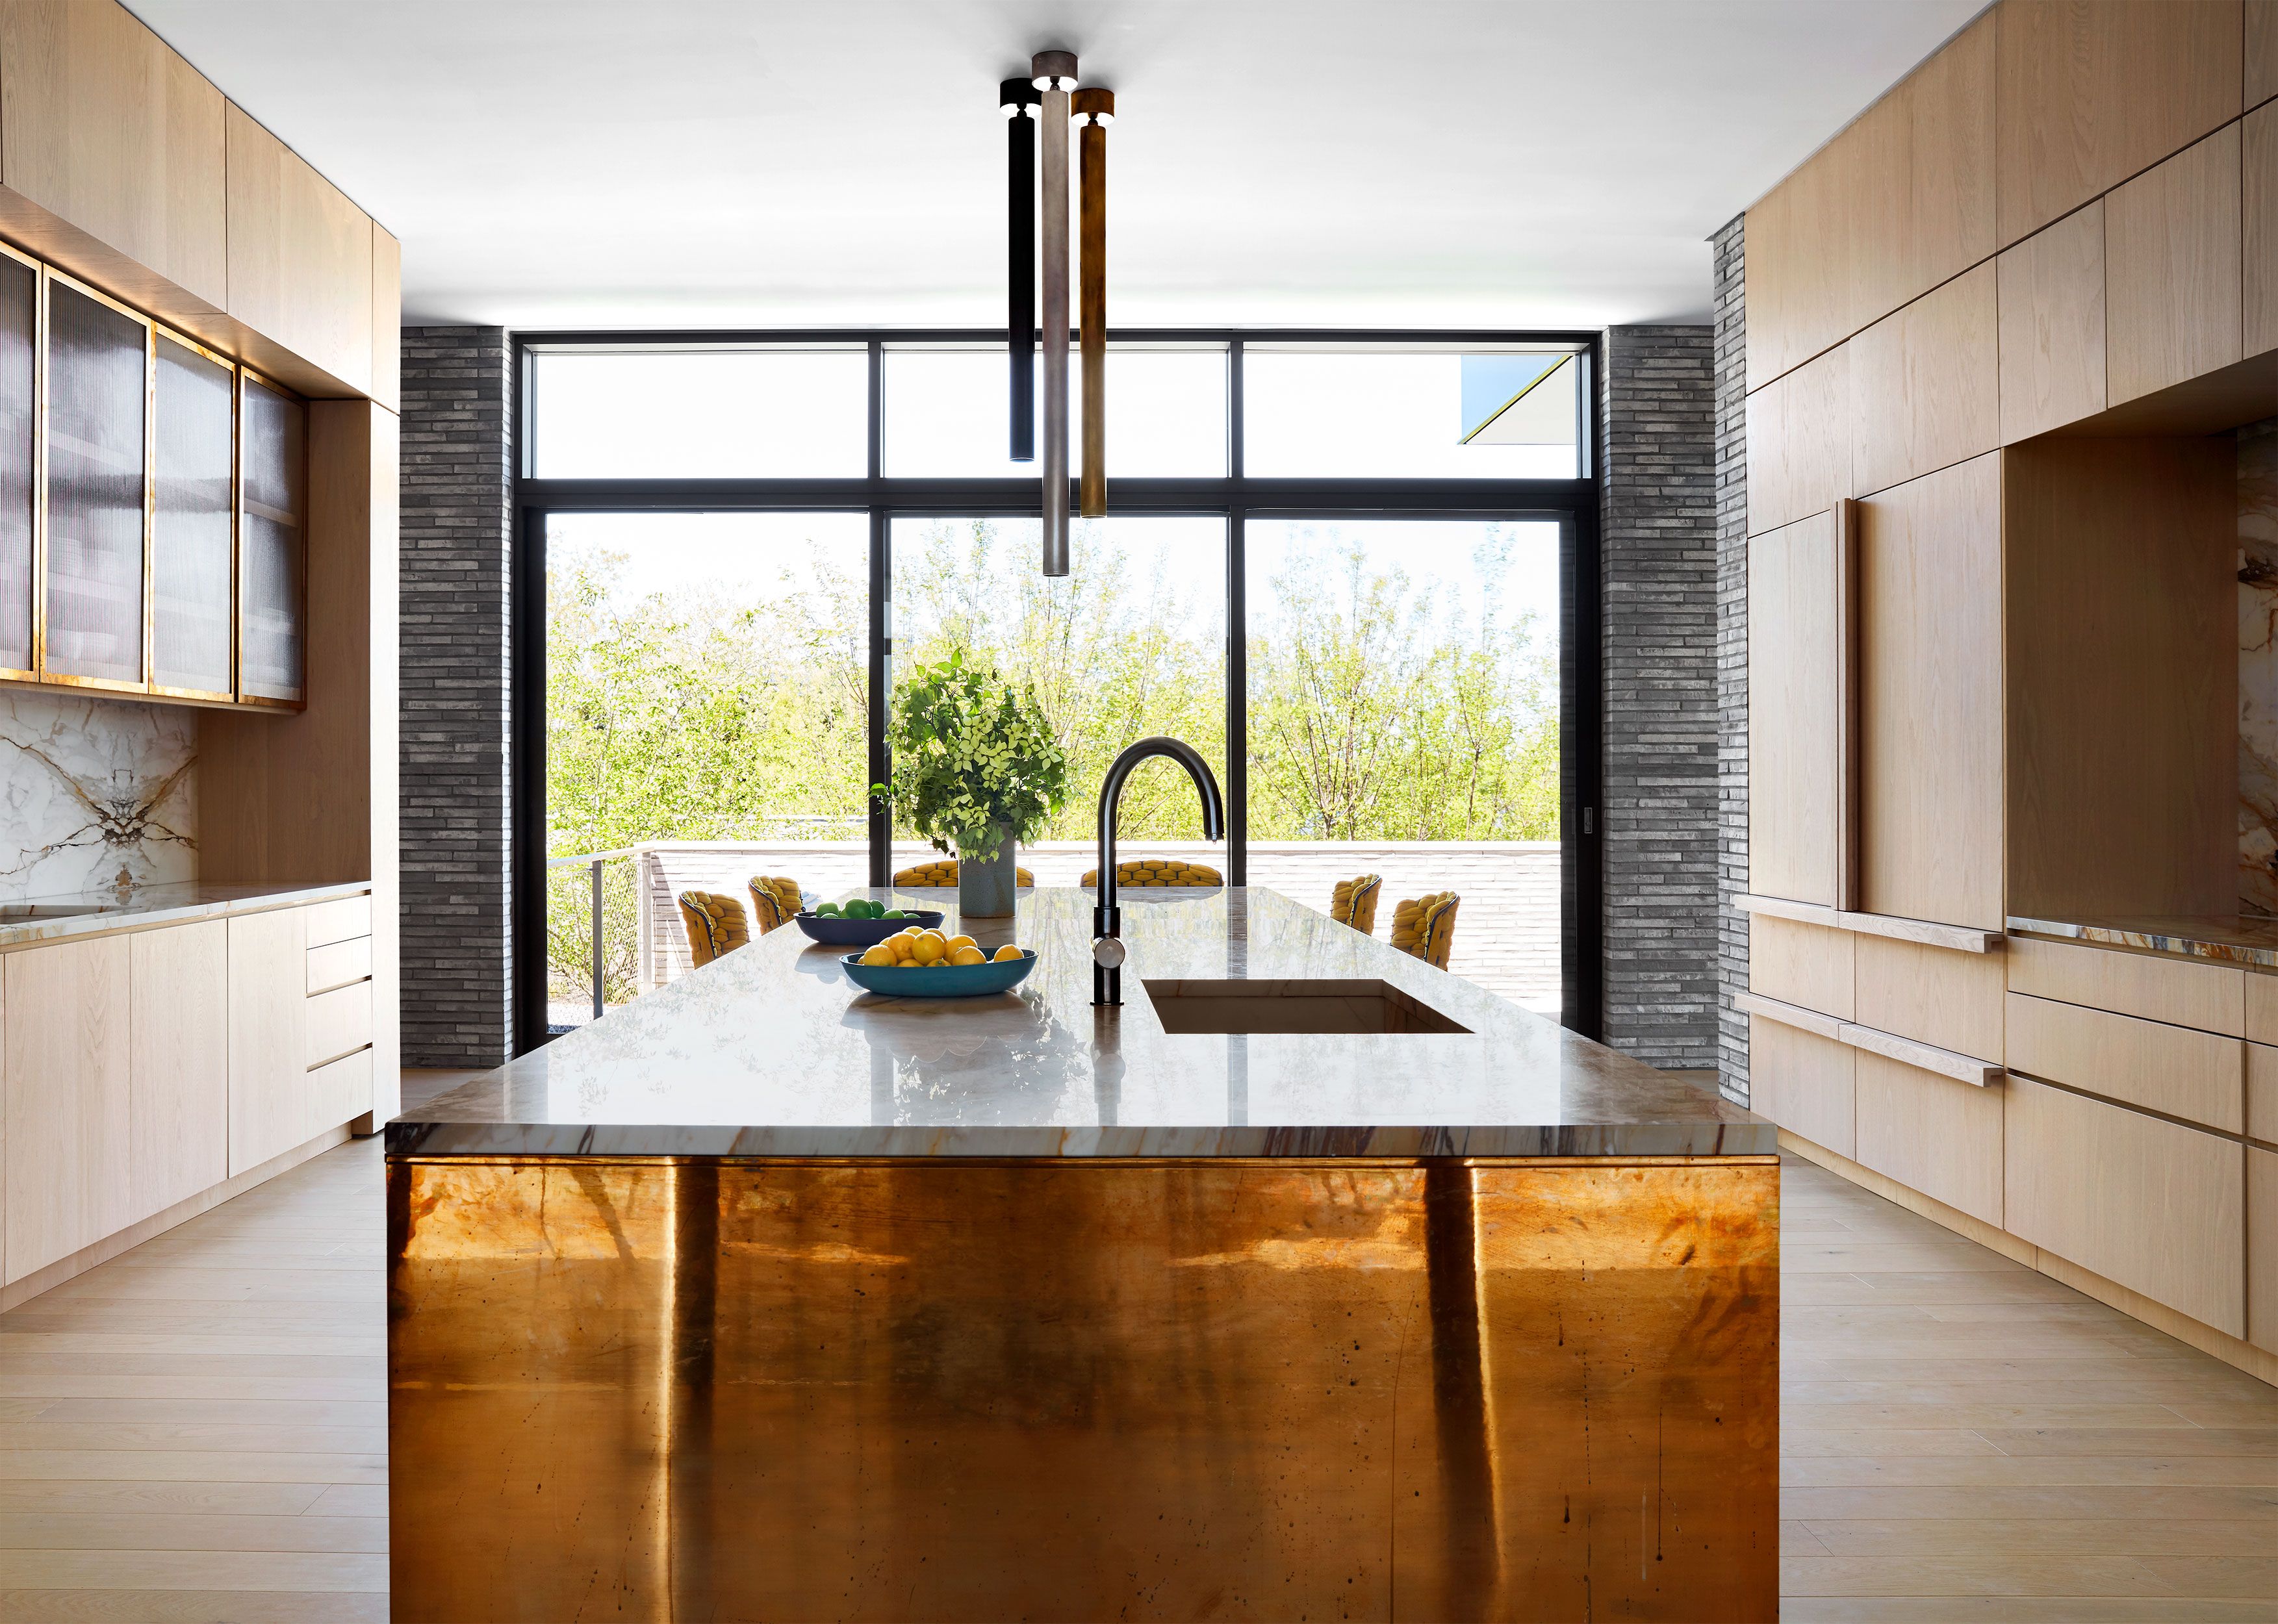 18+ Inspiring Modern Kitchens We Can't Stop Swooning Over